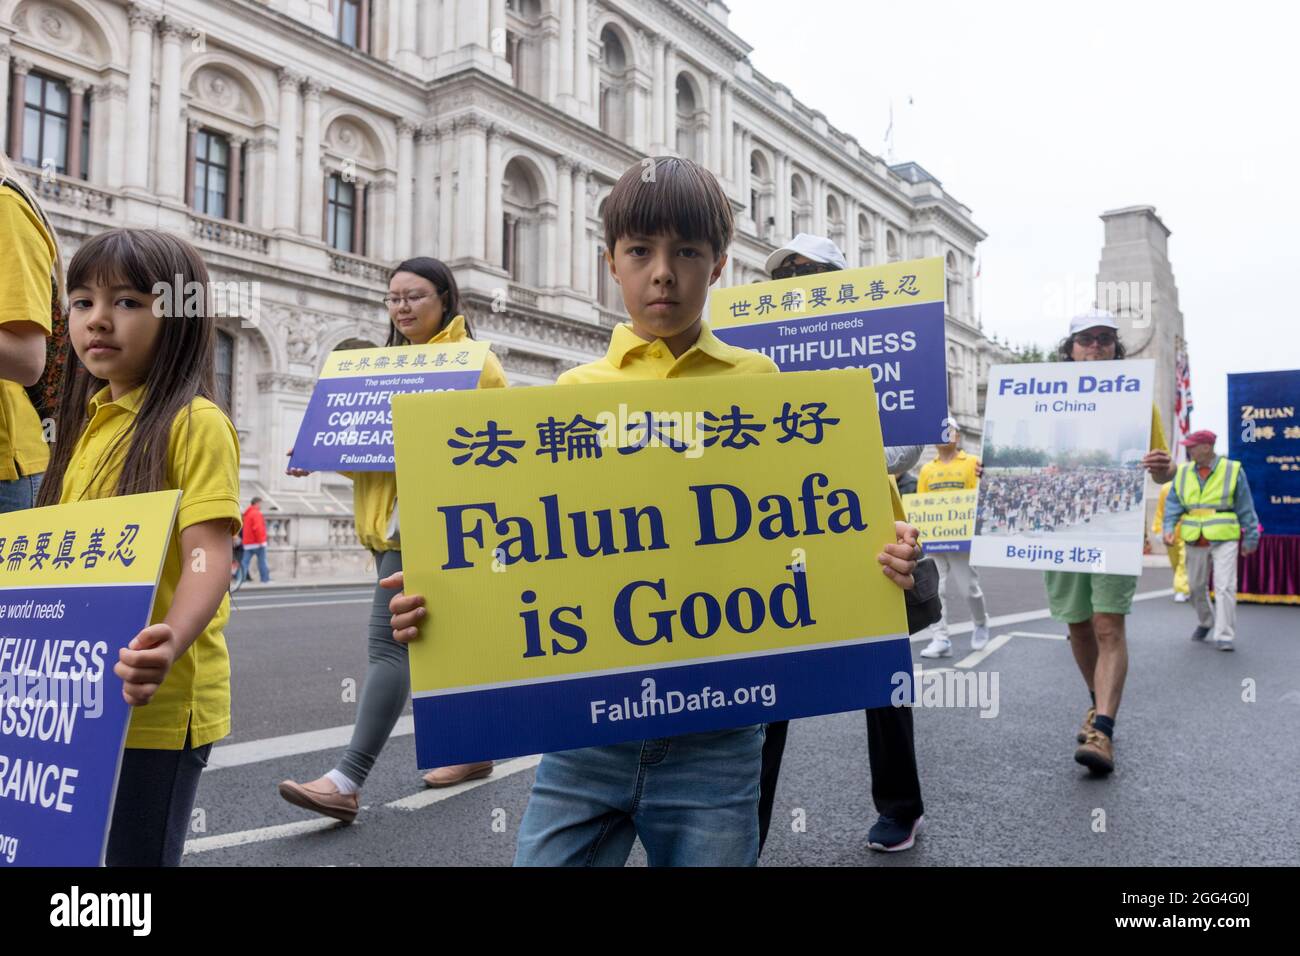 Falun gong protestor seen holding a placard that says 'falun dafa is good', during the demonstration.Falun Gong is a global organisation that opposes the Chinese Communist Party (CCP) in form of spiritual practice. The organisation strives to unveil corruption and human rights violation undertaken by the CCP and adopts the doctrine of ‘truthfulness, compassion, and forbearance'. Several Falun Gong members gathered in London to march across Westminster, bringing across messages including stop organ harvesting and political persecution in China. (Photo by Belinda Jiao/SOPA Images/Sipa USA) Stock Photo